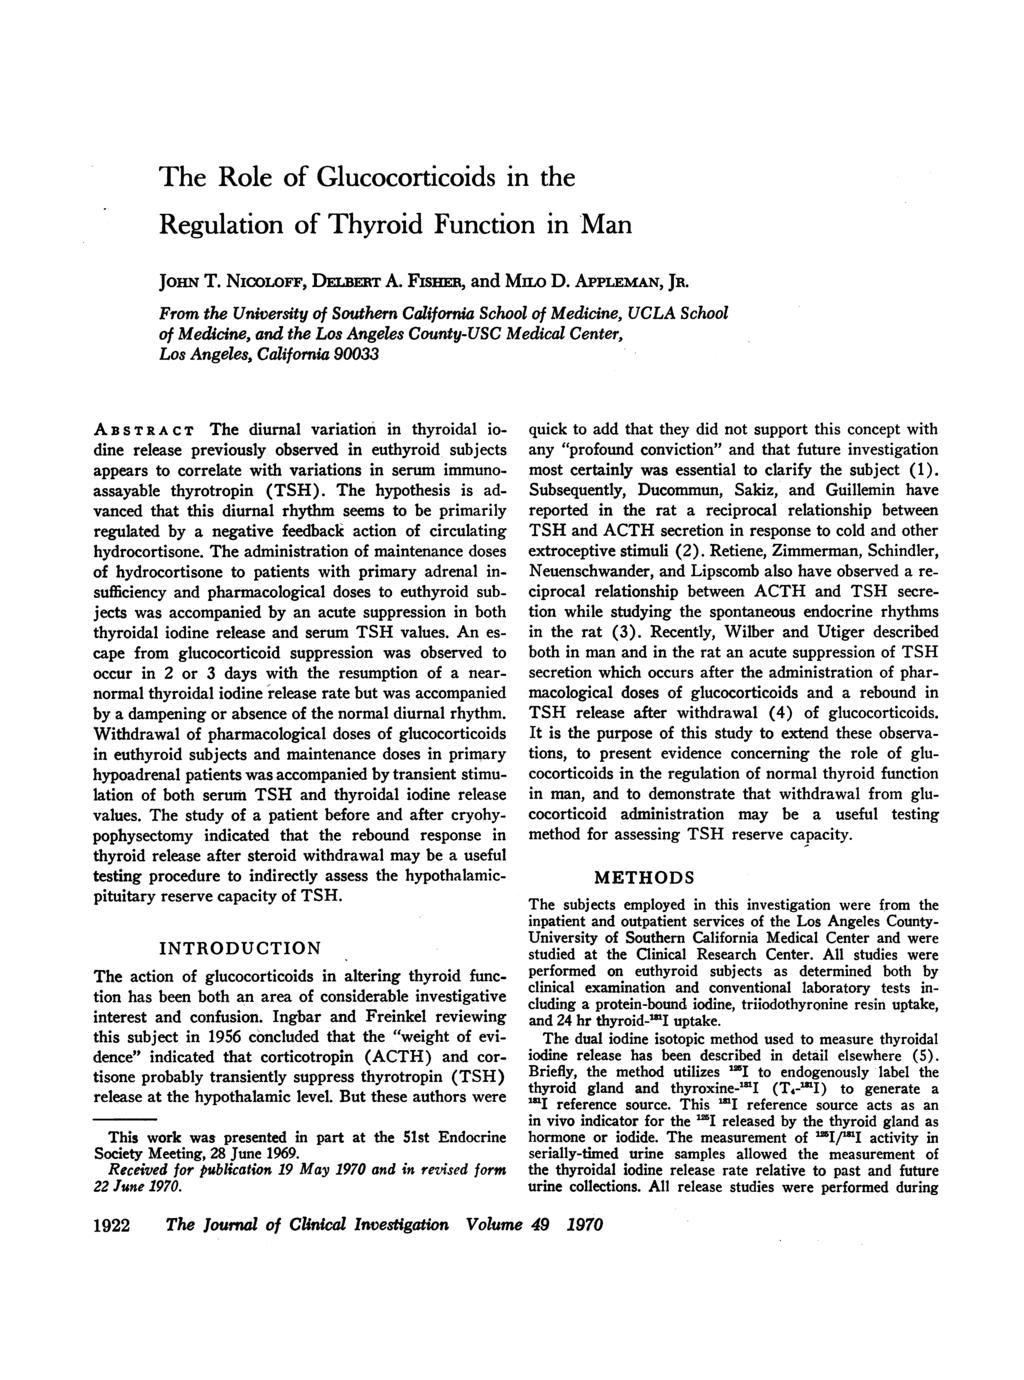 The Role of Glucocorticoids in the Regulation of Thyroid Function in Man JoHN T. NICOLOFF, DELBERT A. Fisim, and Mmo D. APPLEMAN, JR.